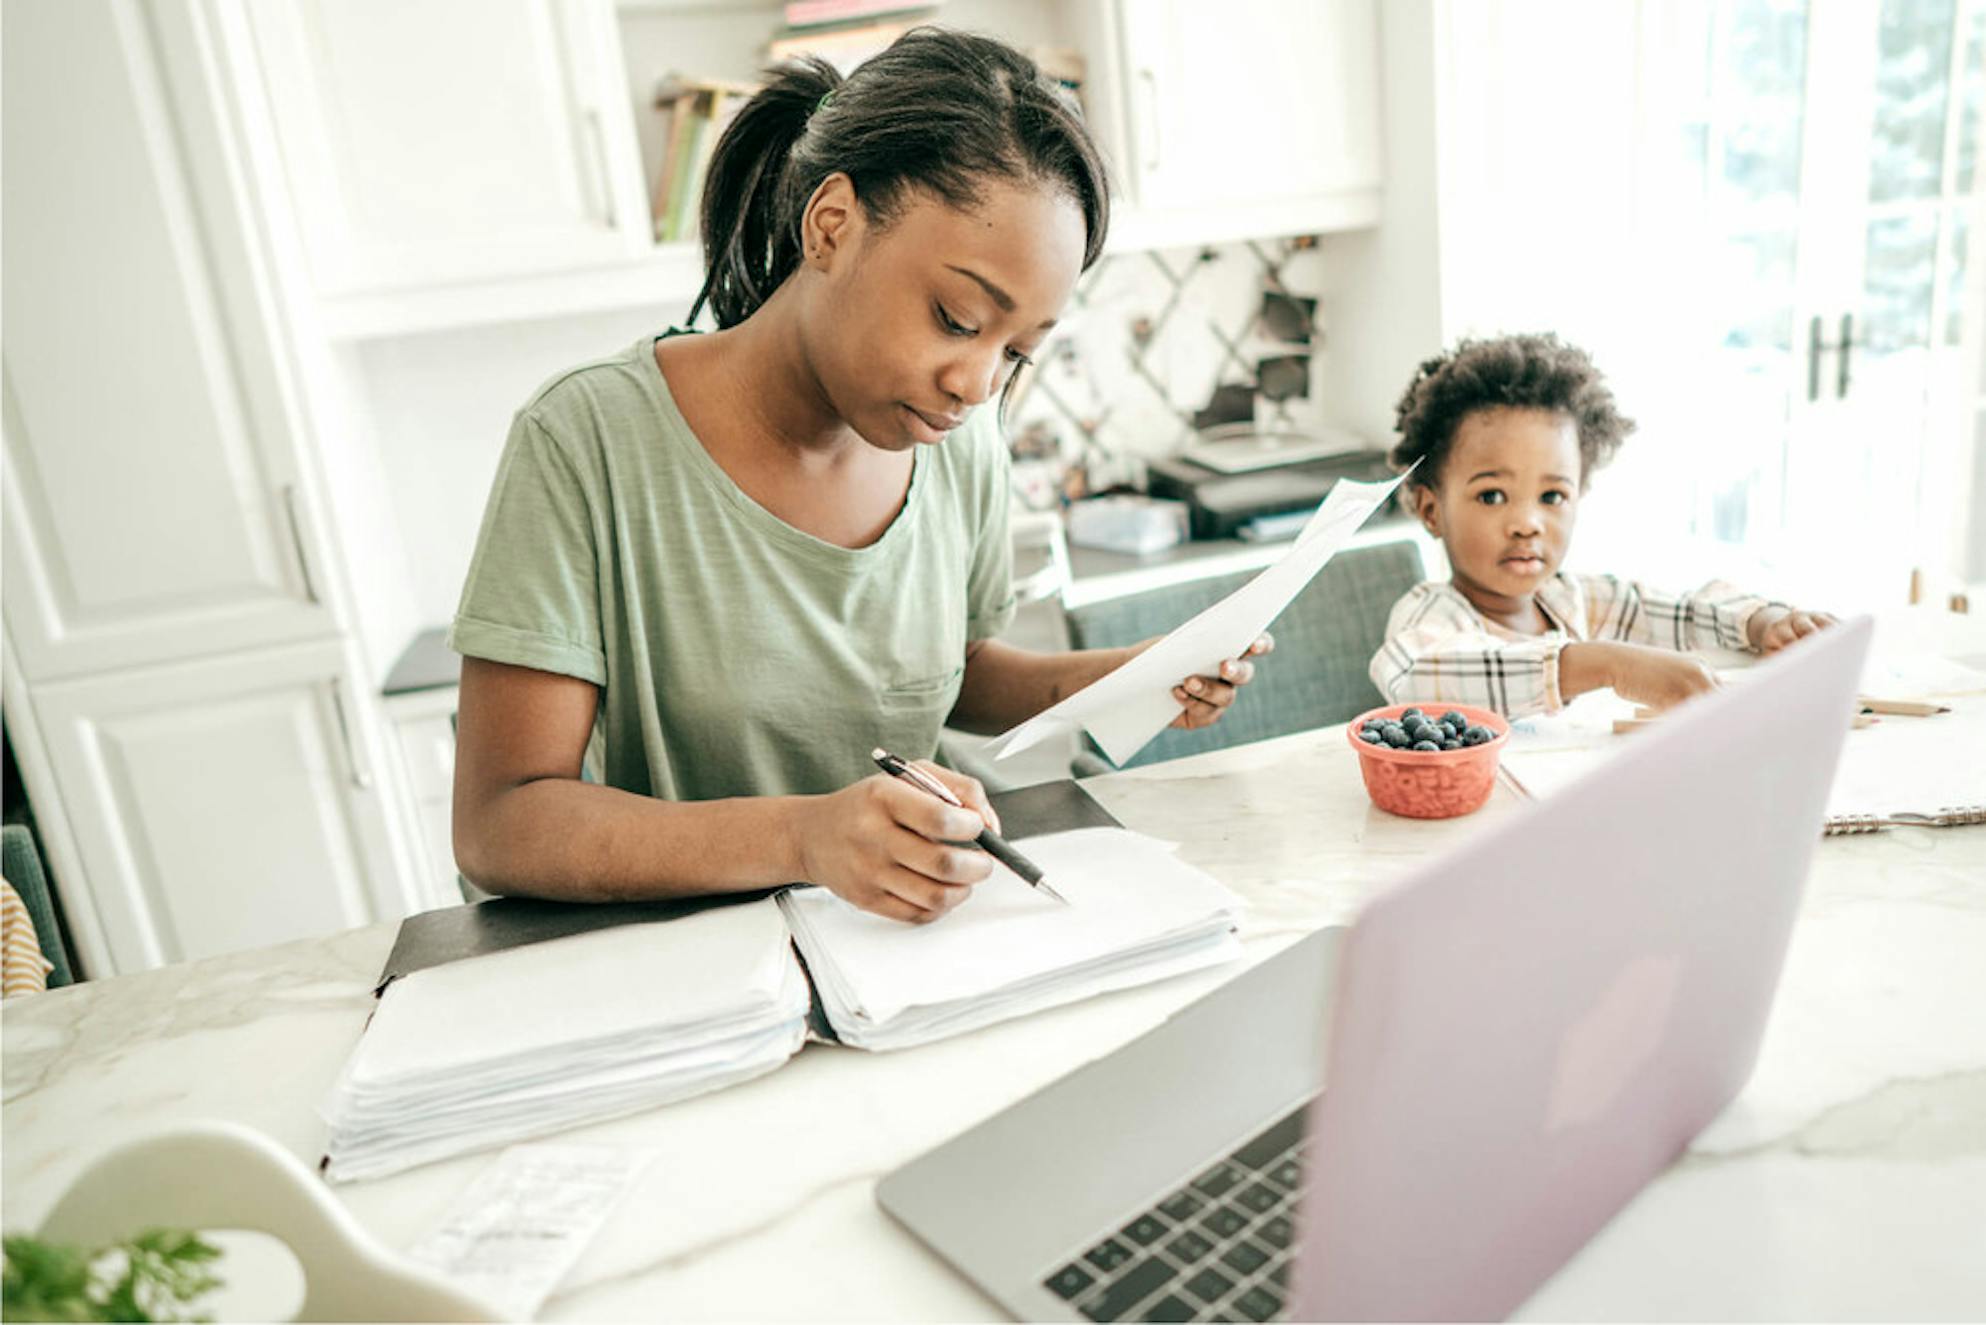 Woman working on her taxes with her son from her home